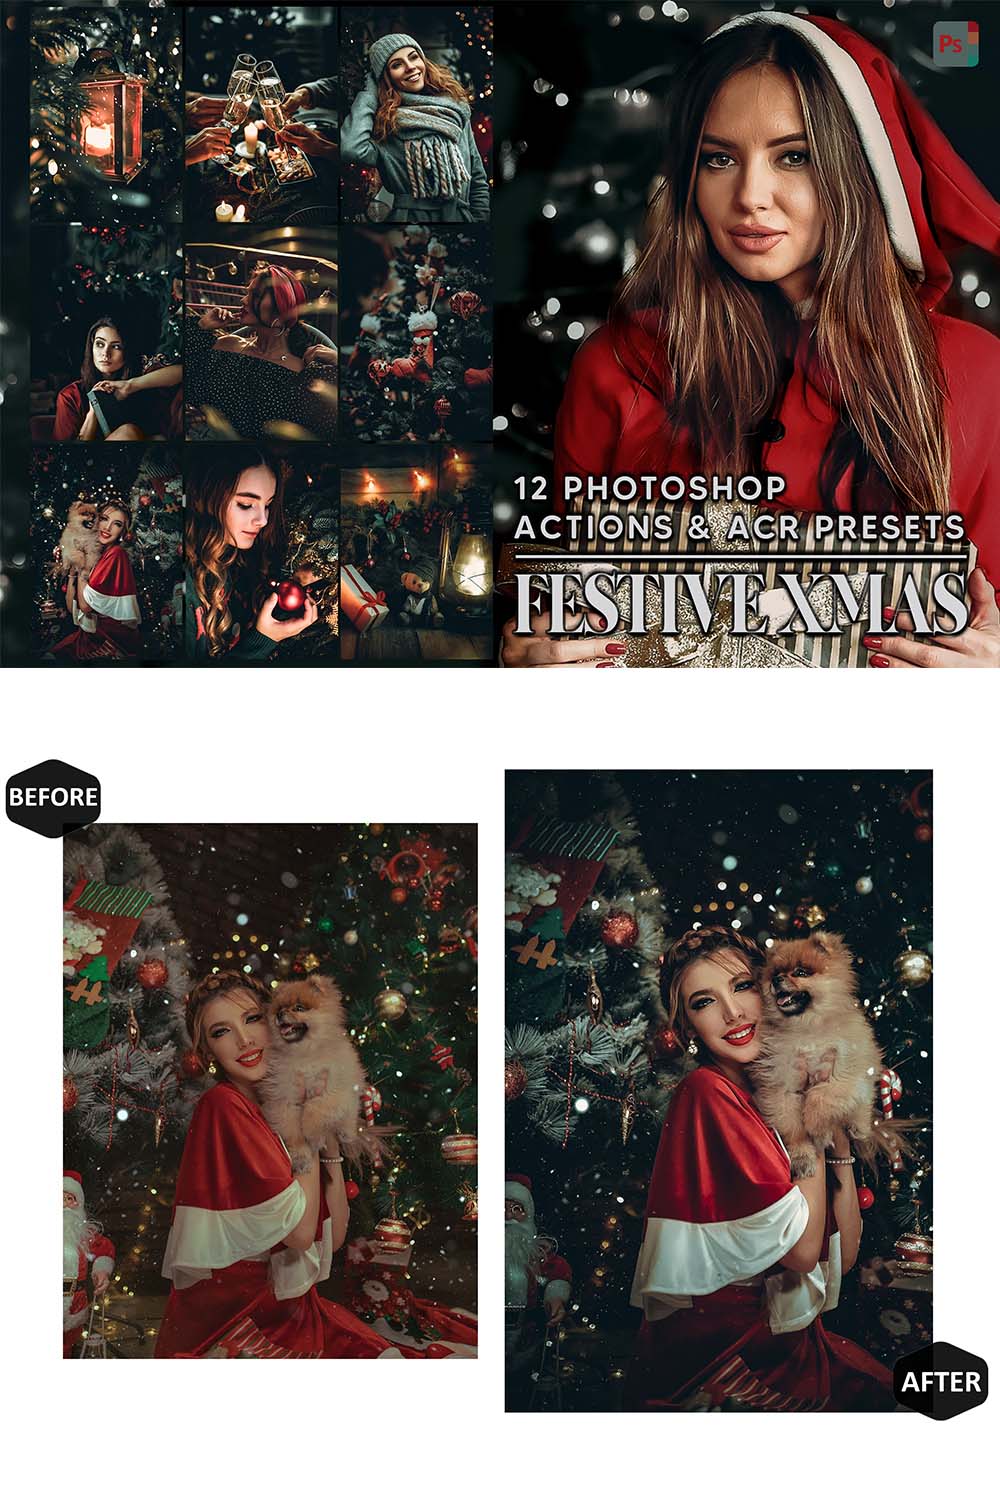 12 Photoshop Actions, Festive Xmas Ps Action, Christmas ACR Preset, Holiday Ps Filter, Atn Portrait And Lifestyle Theme For Instagram, Blogger pinterest preview image.